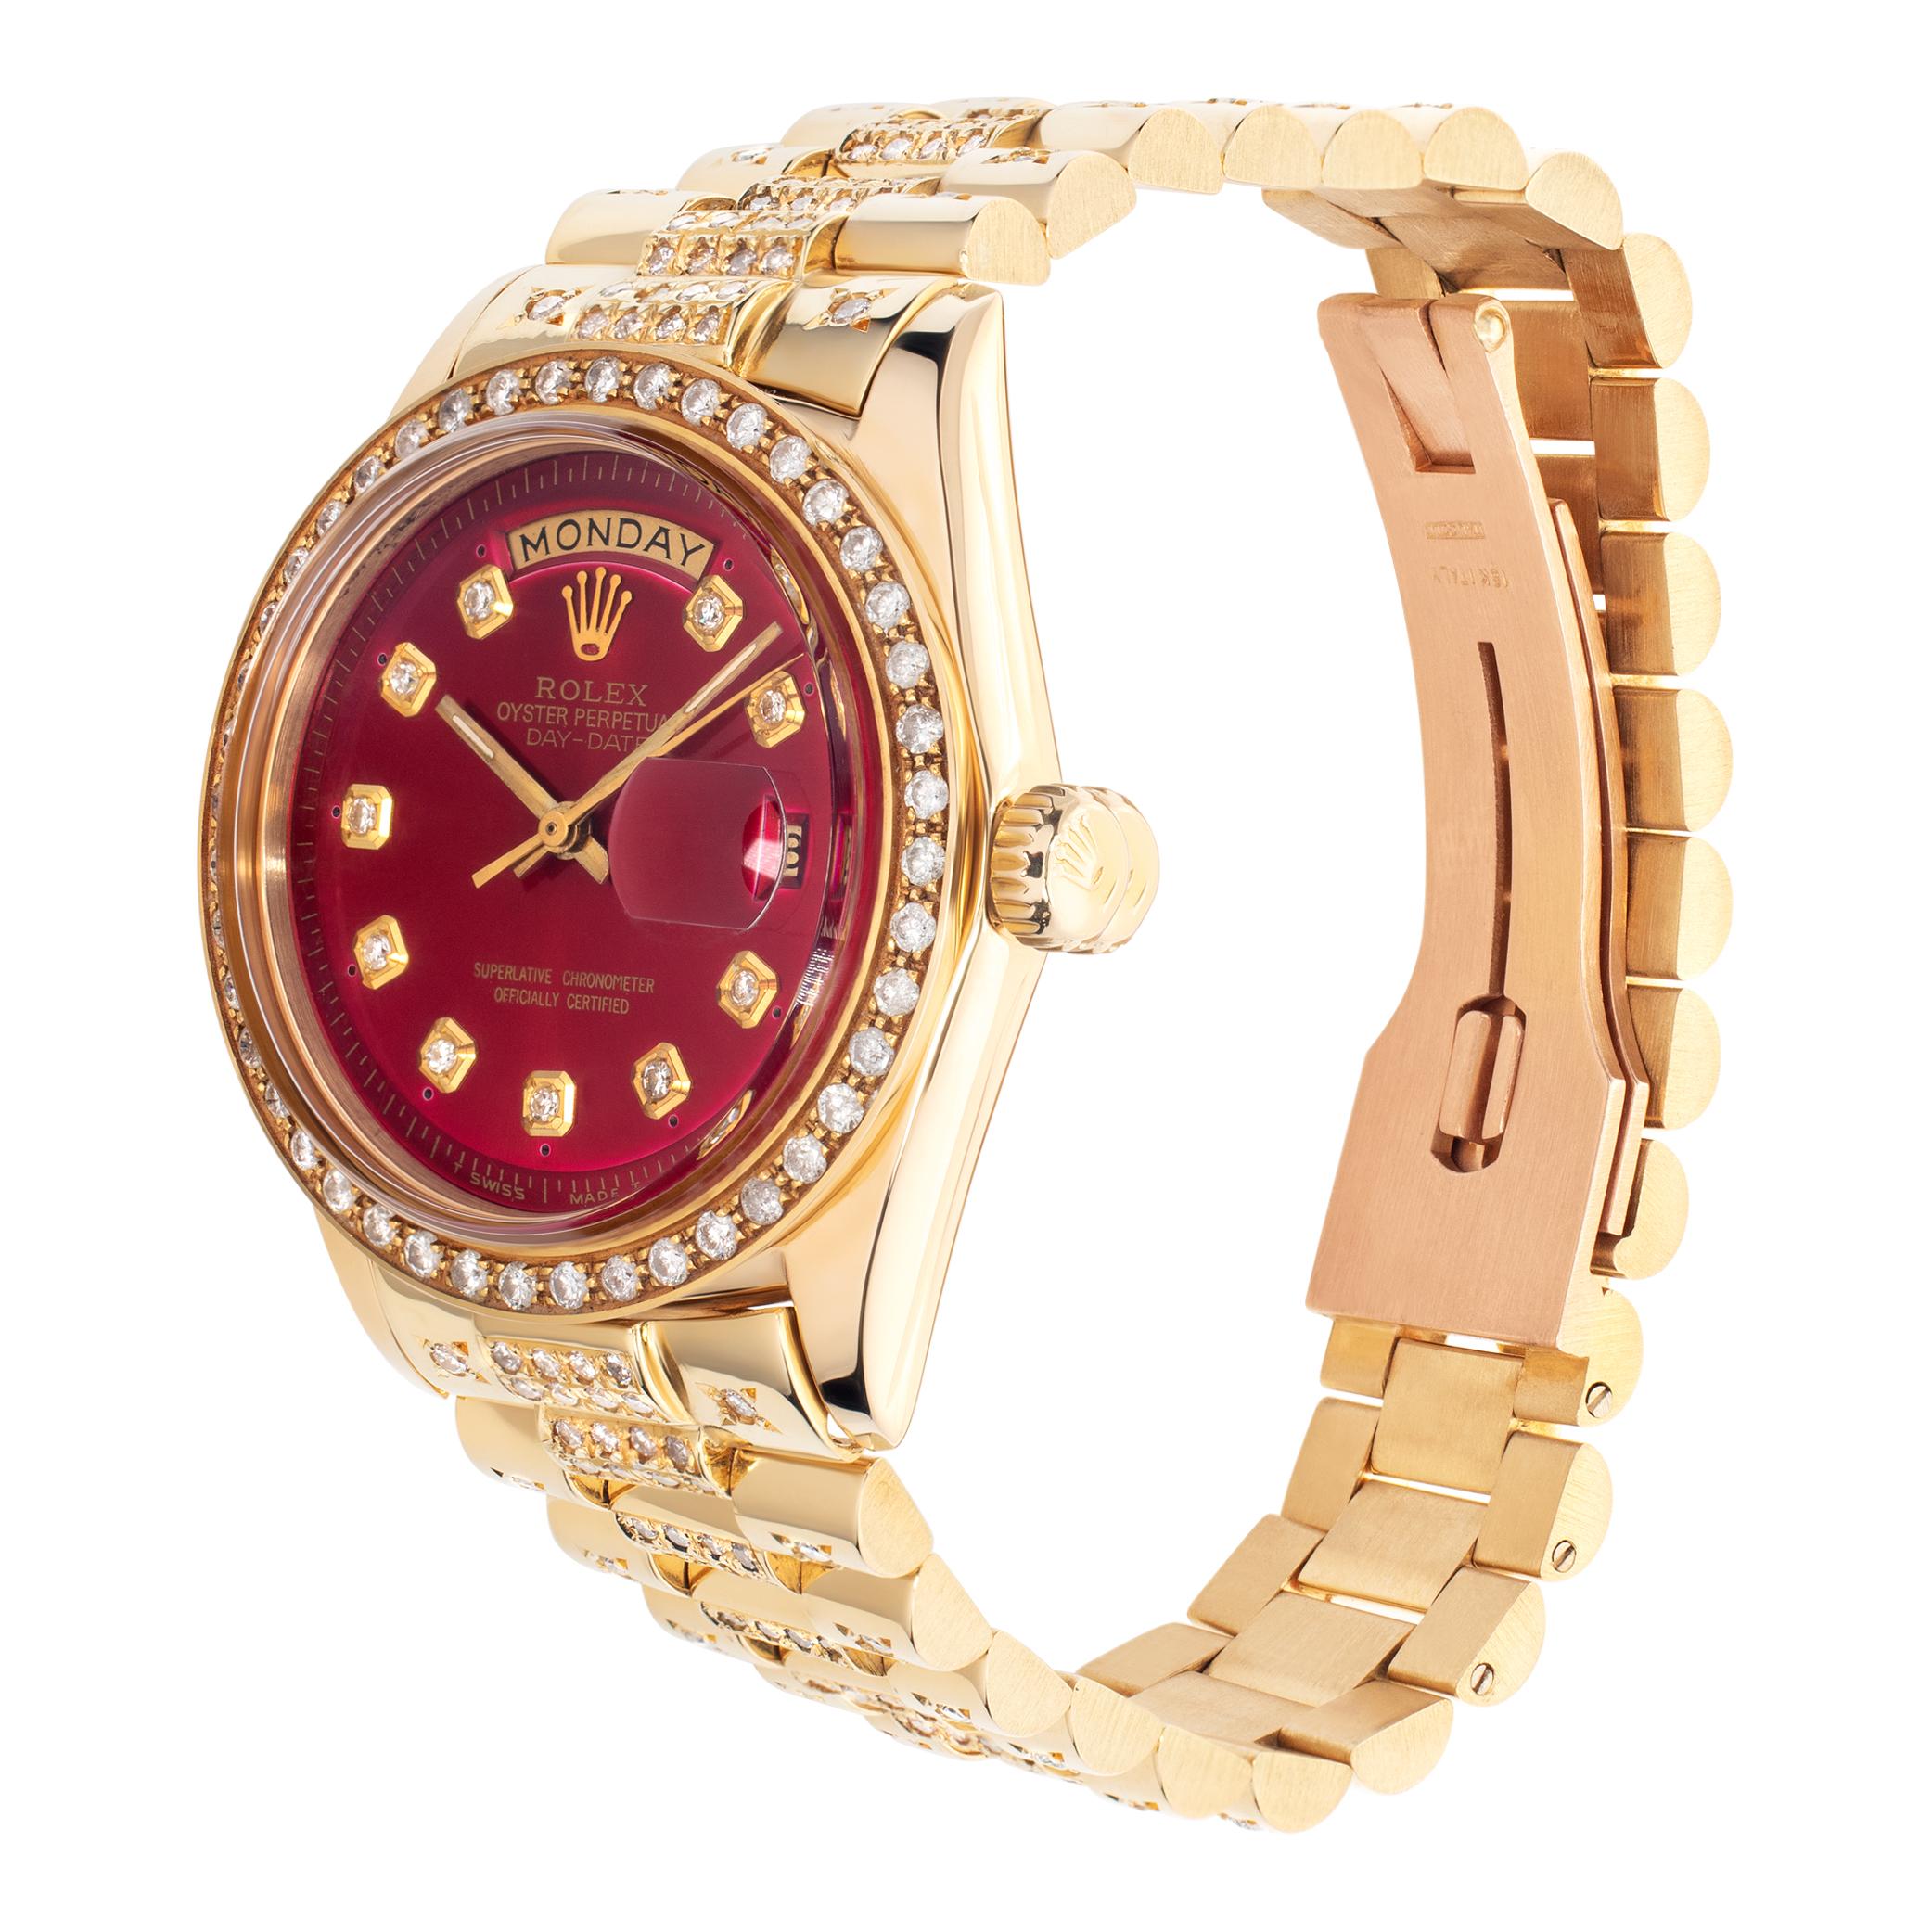 Rolex Day-Date in 18k yellow gold with custom diamond dial, bezel and custom President style diamond bracelet. Auto w/ sweep seconds, date and day. 36 mm case size. **Bank wire only at this price** Ref 1803. Circa 1984. Fine Pre-owned Rolex Watch.

